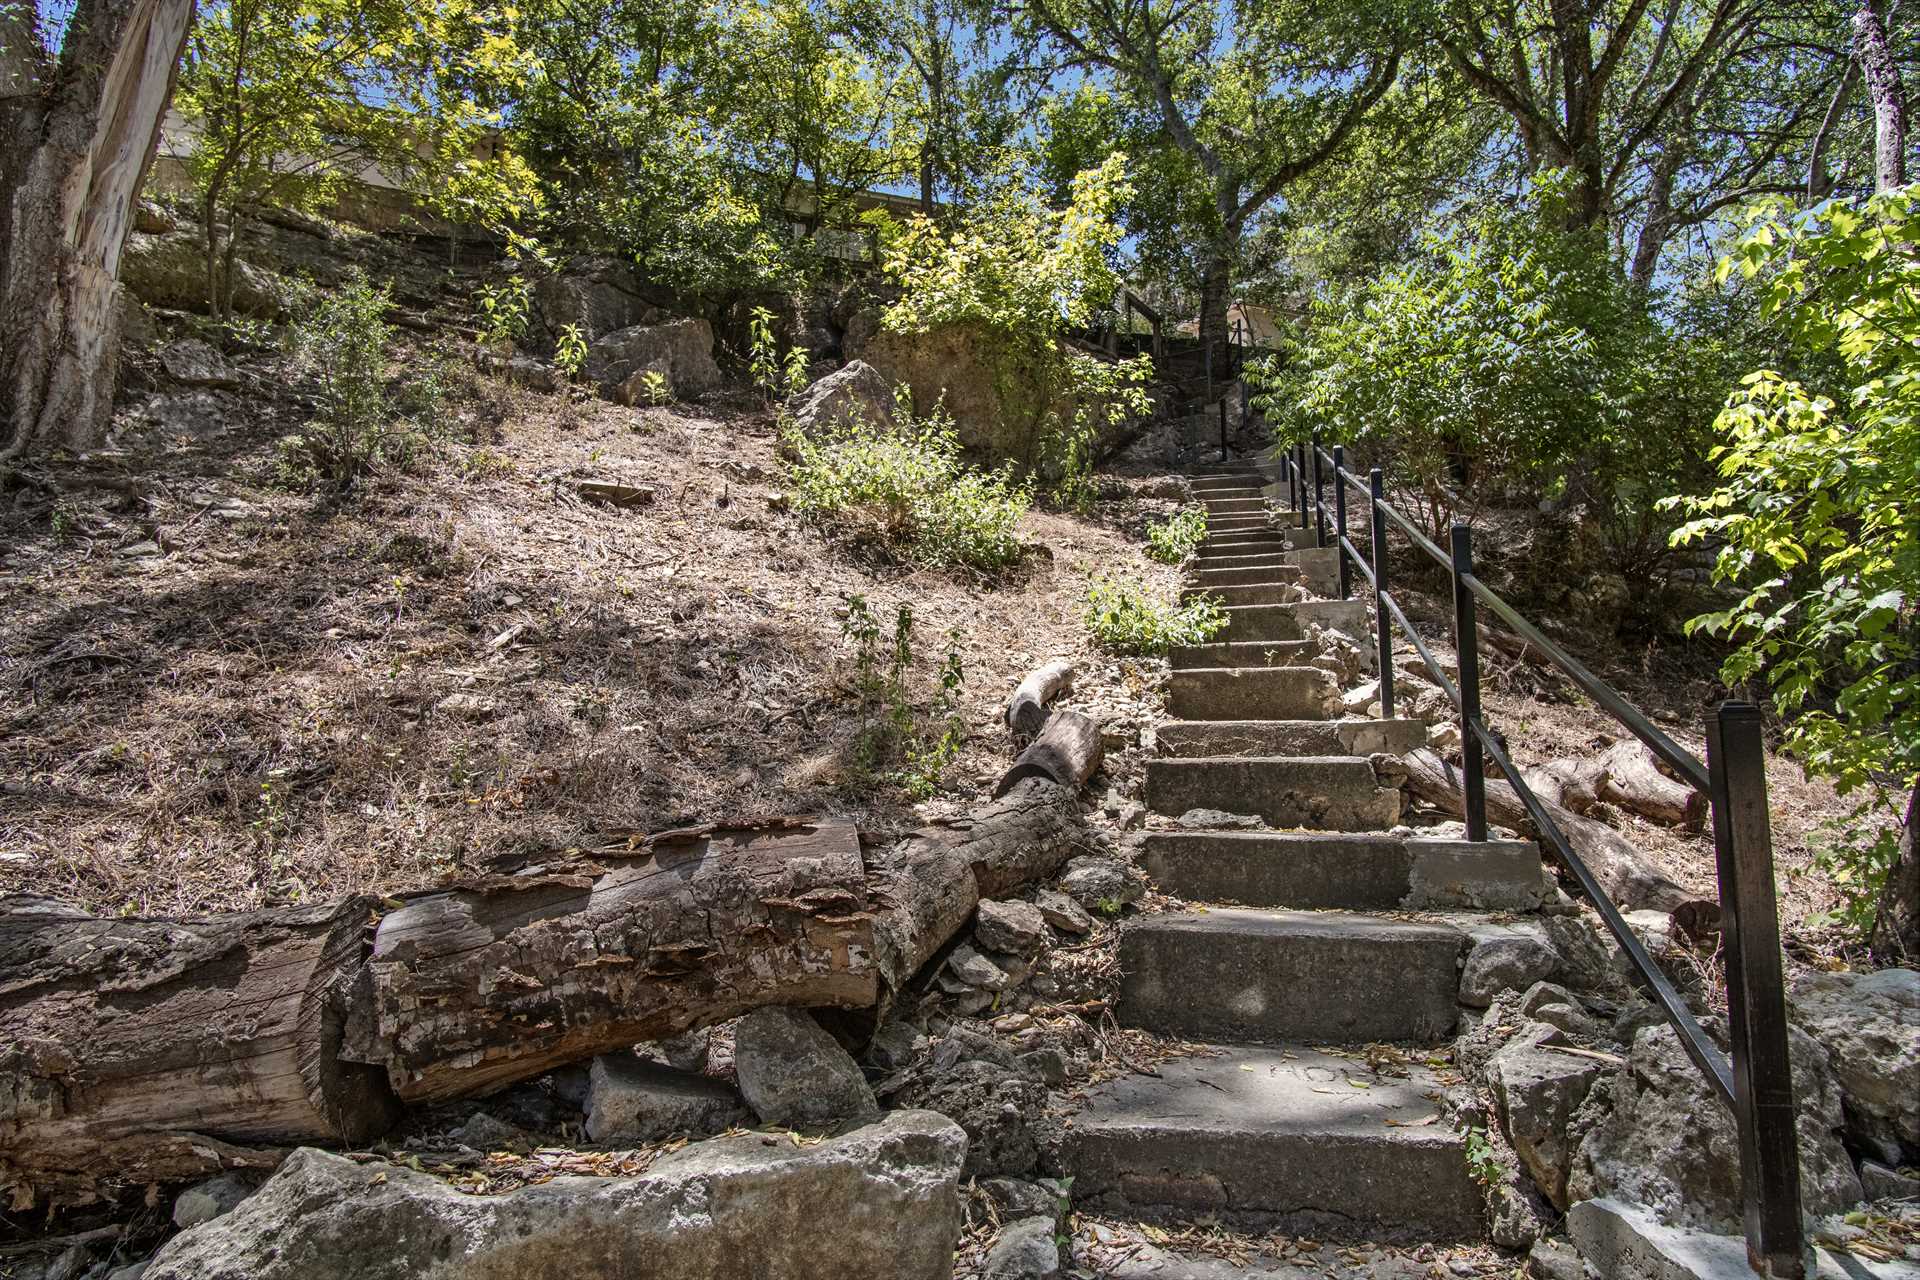                                                 This staircase provides your private access to the Medina River. Please be aware the steps are somewhat steep.